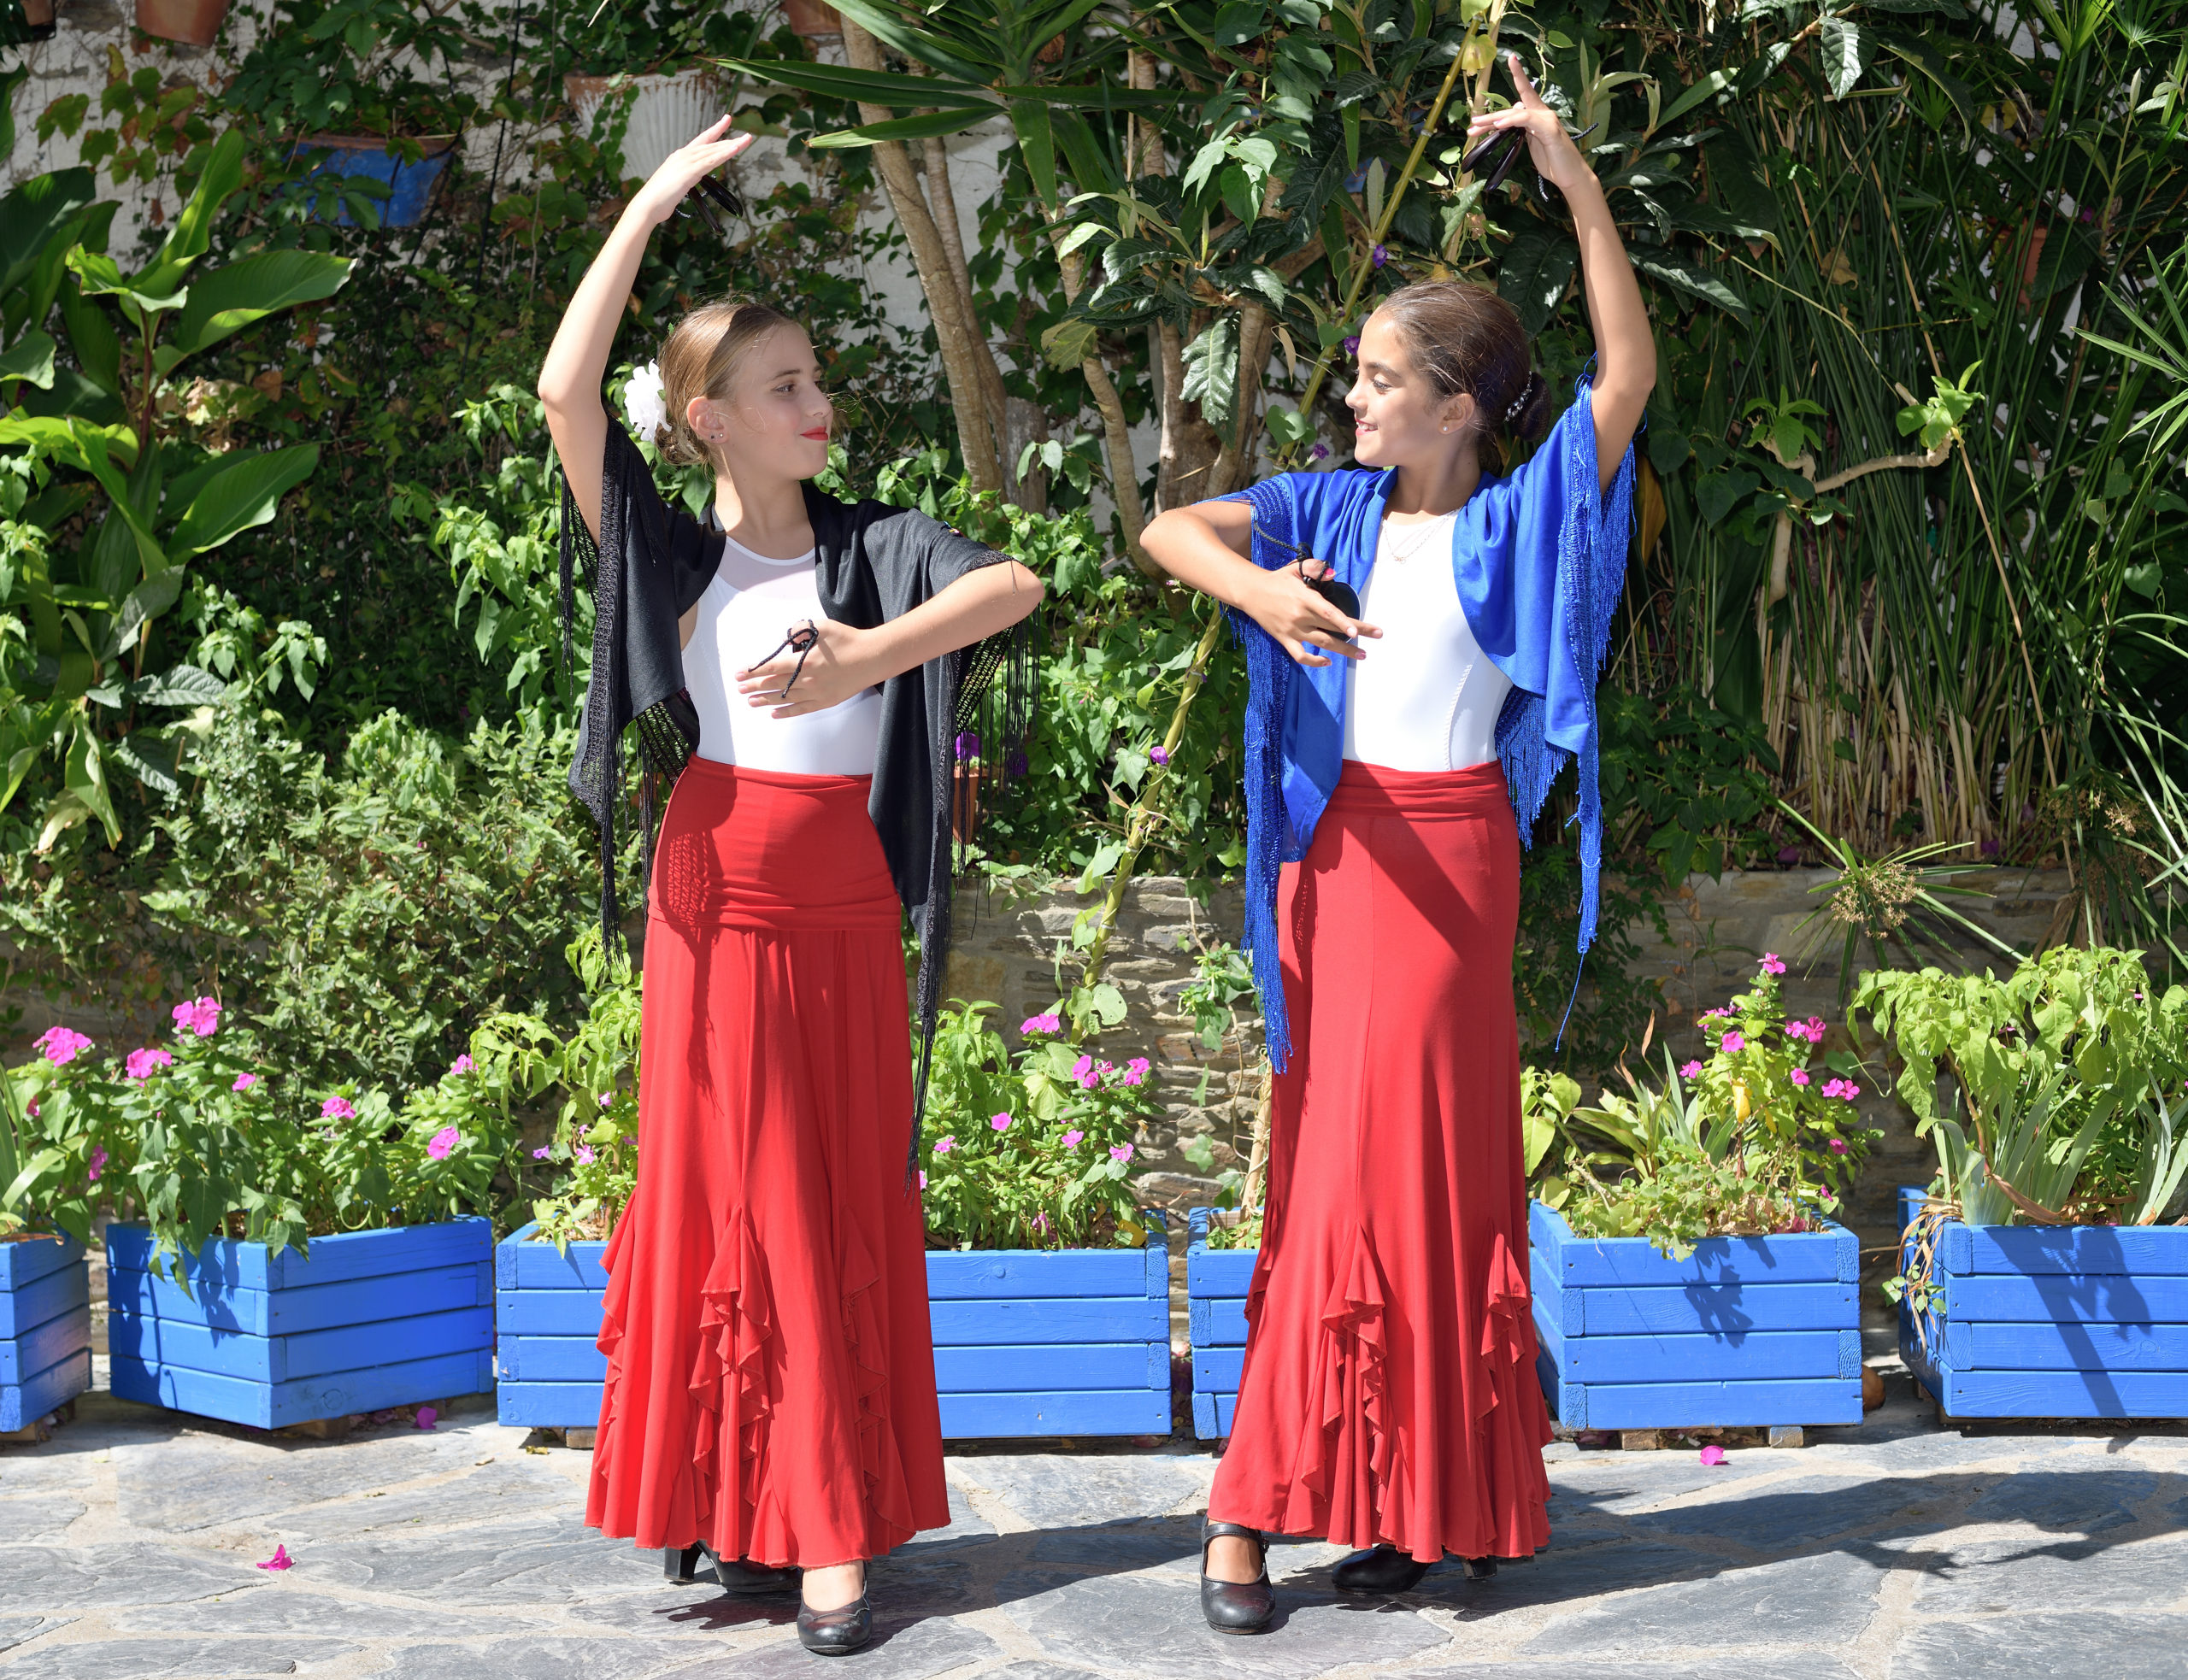 Two girls are dancing flamenco. They are in a symmetrical position with the typical handkerchief